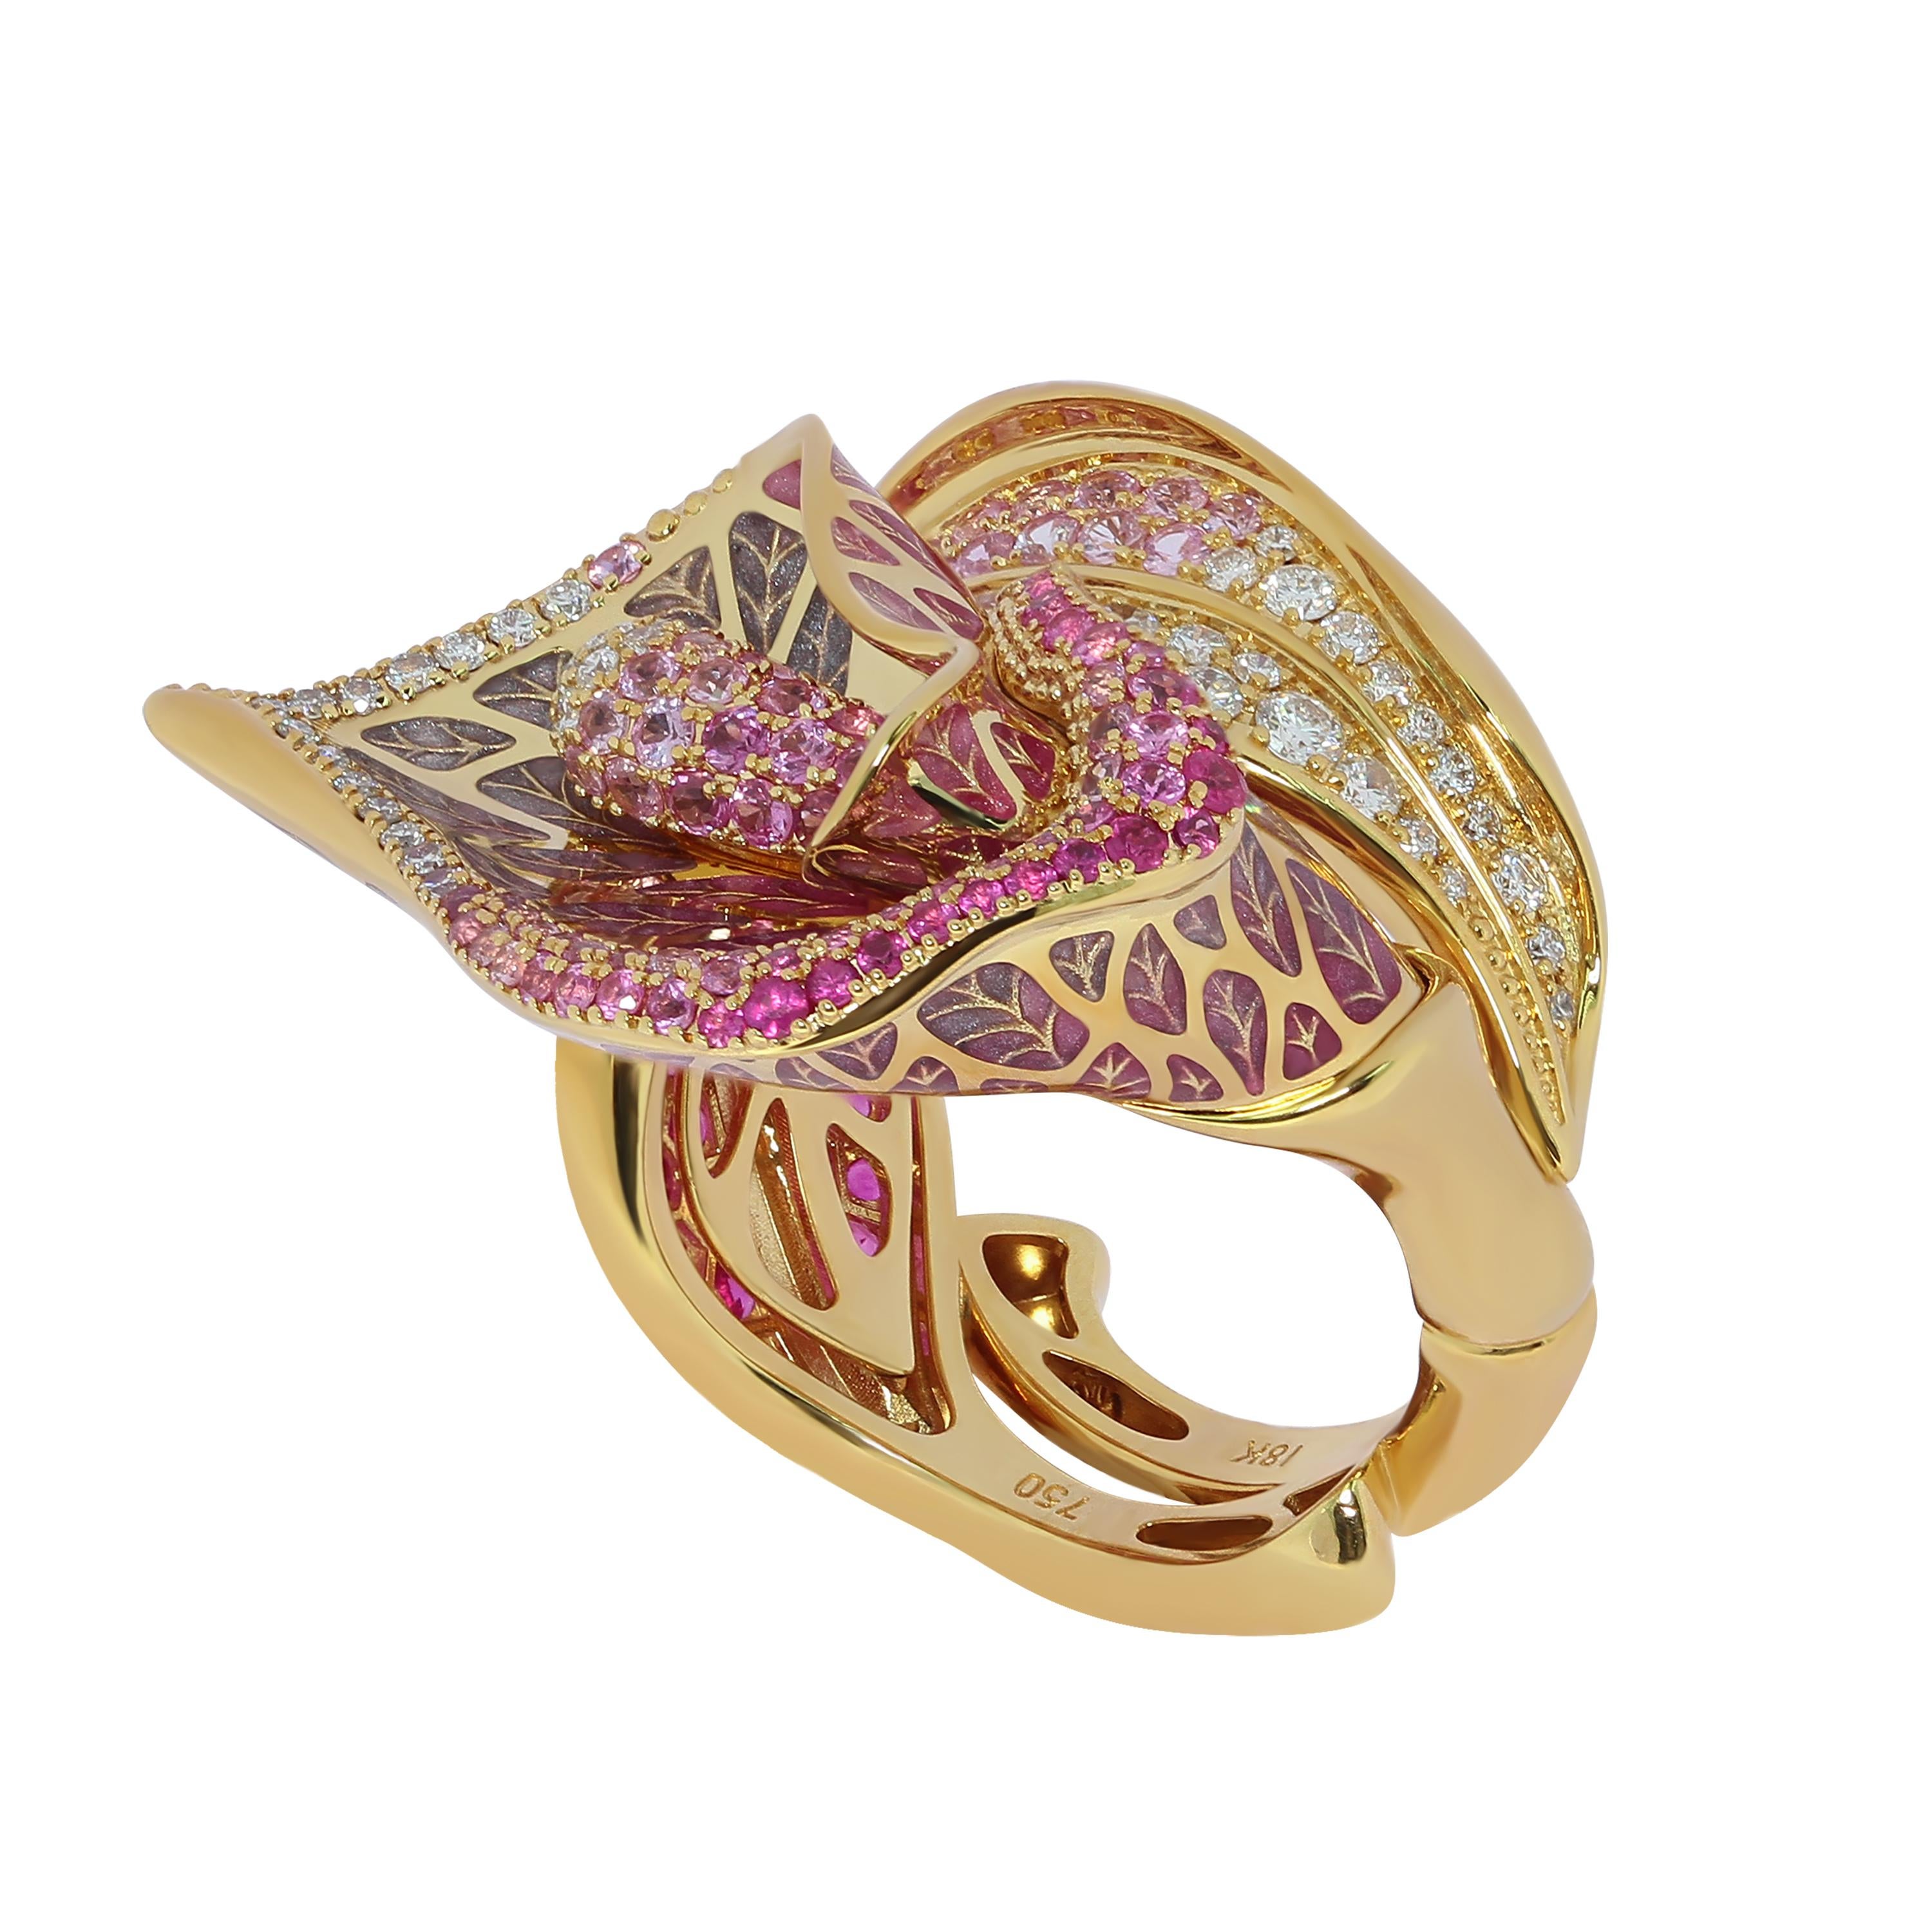 Pink Sapphire Diamonds Colored Enamel 18 Karat Yellow Gold Calla Lilly Ring
There is a legend that one girl wanted to marry the cruel leader of the tribe, she decided to throw herself into the fire from misfortune, but the gods saved her and turned